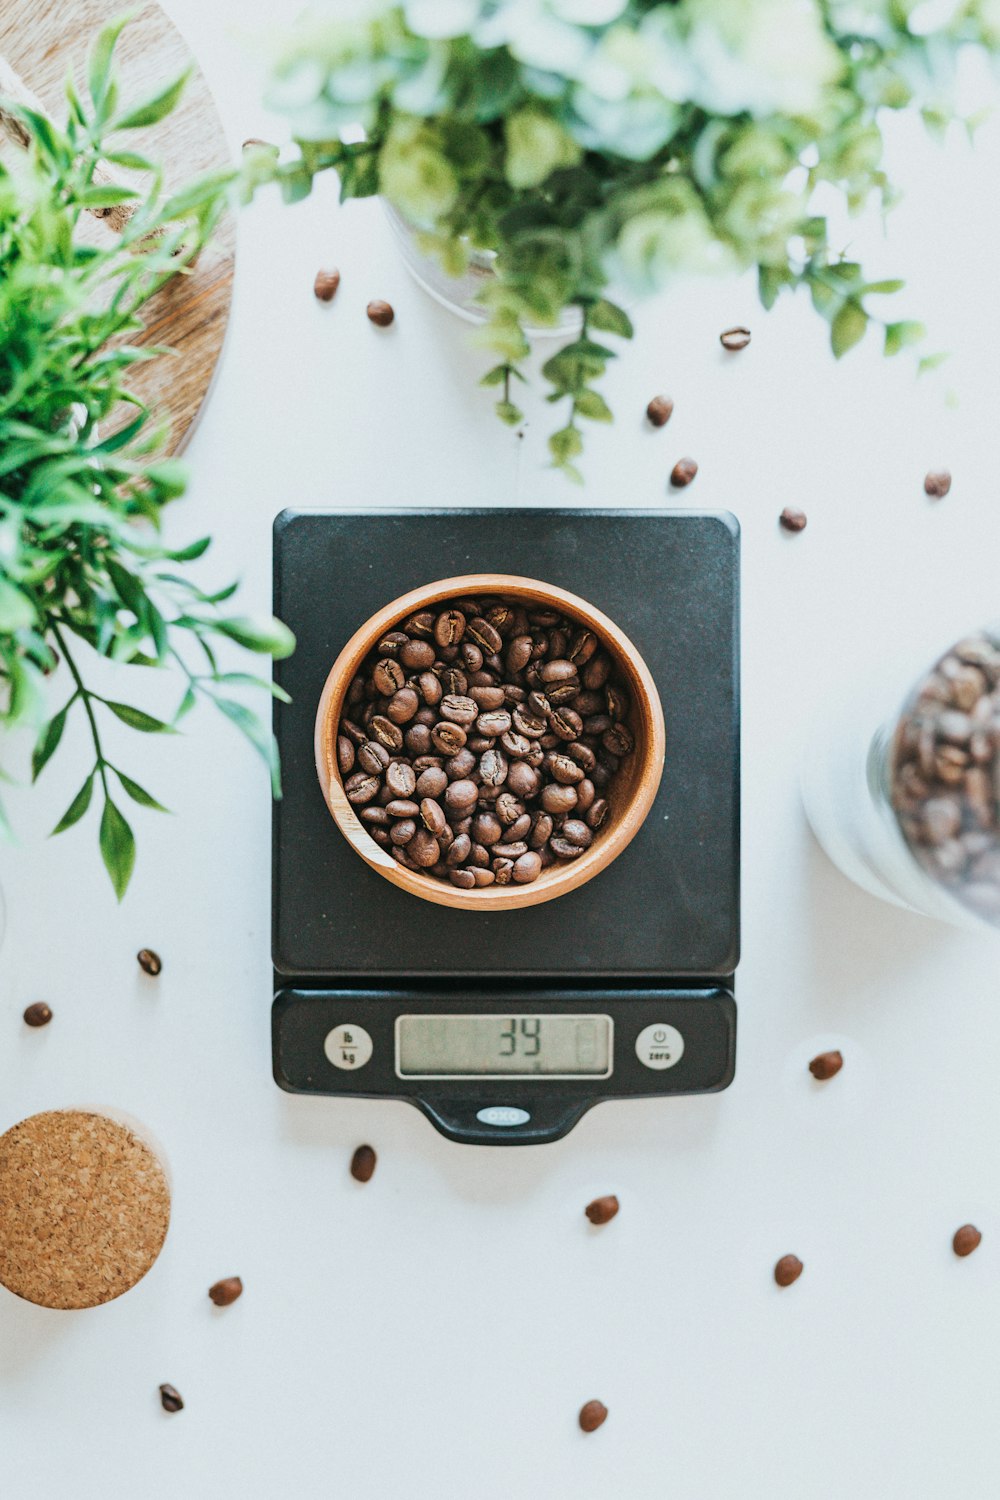 photo of bowl filled with coffee beans on black digital scale at 39 grams